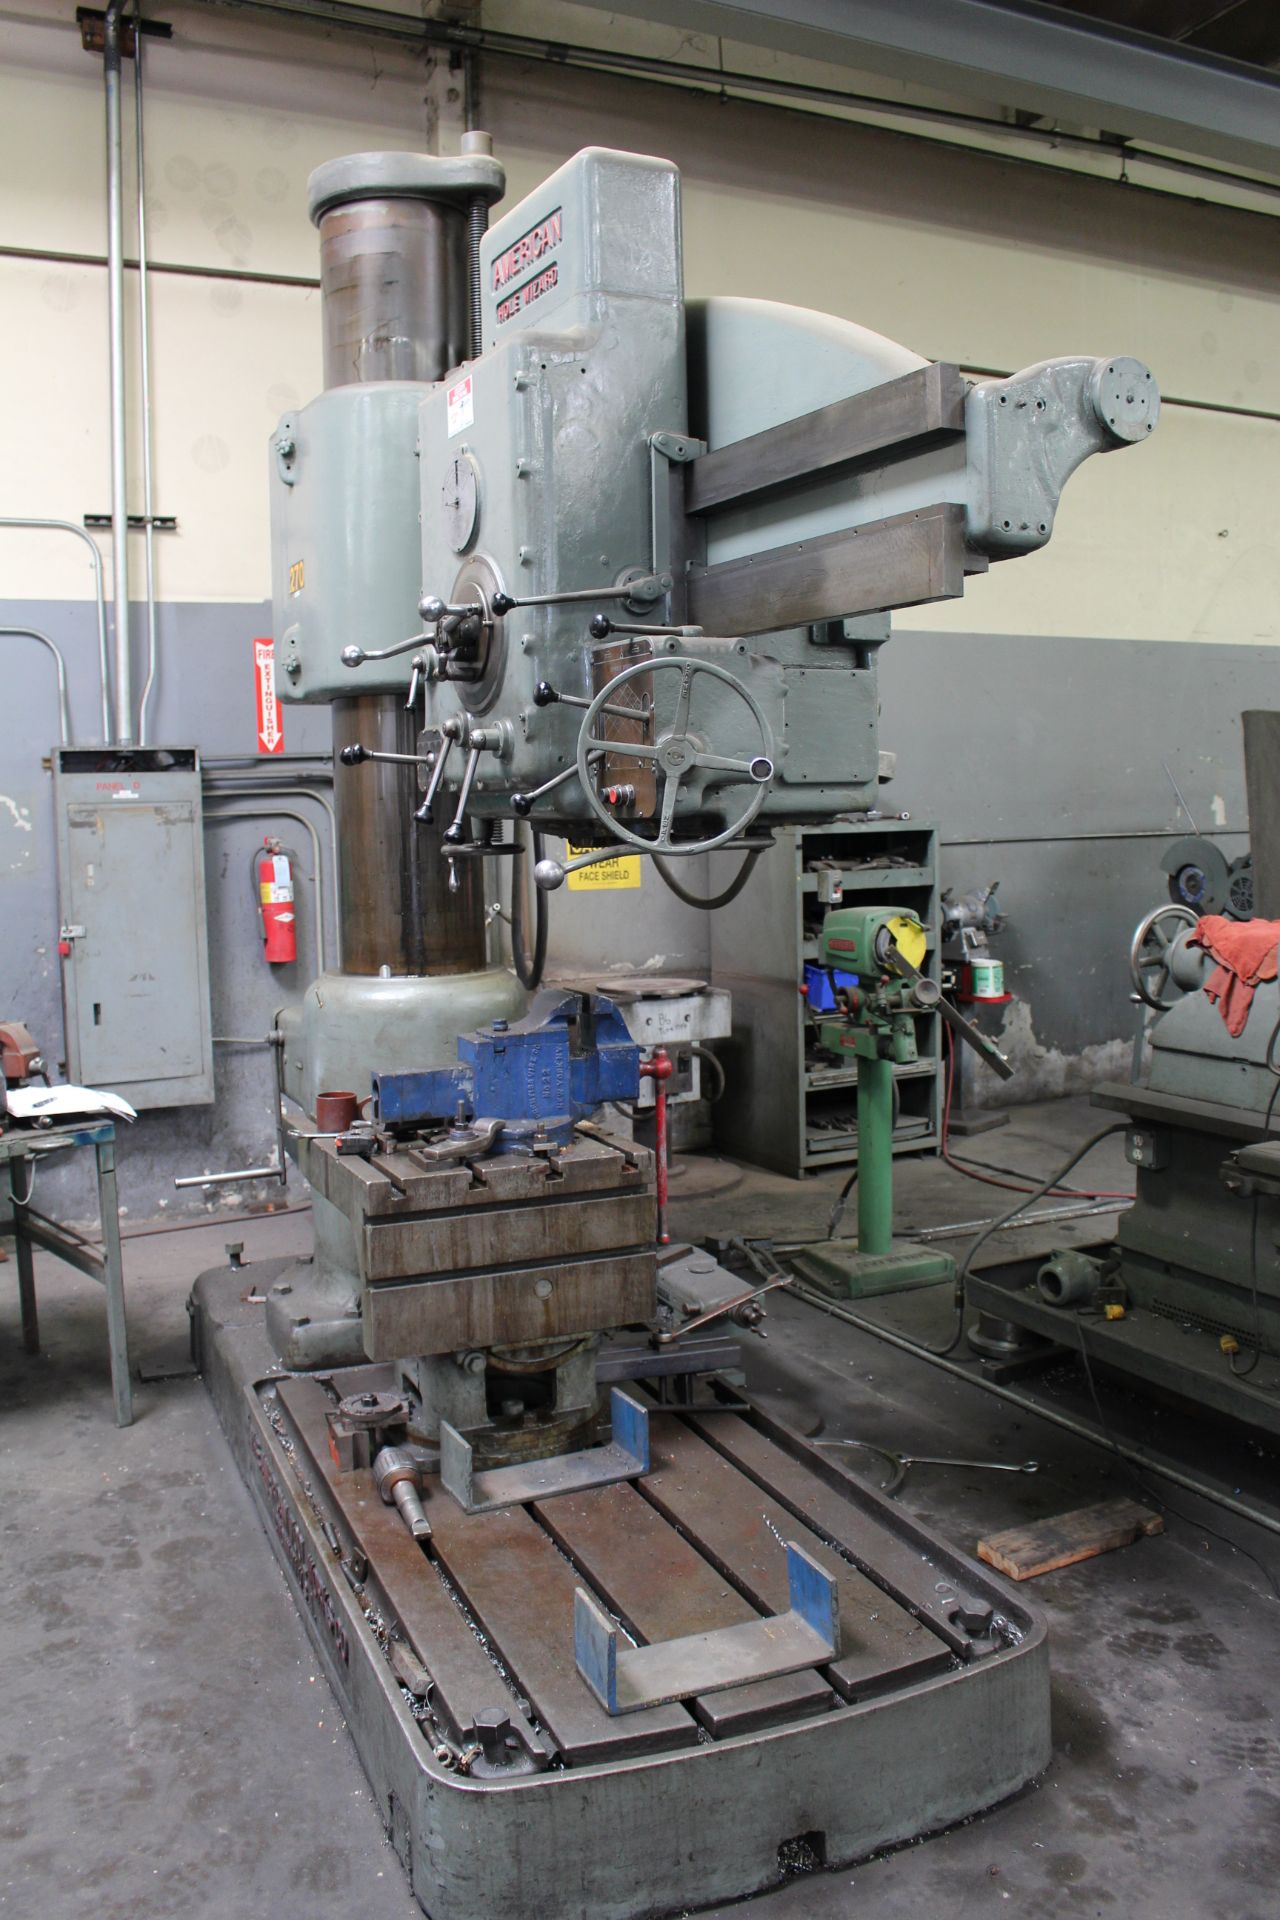 AMERICAN HOLE WIZARD RADIAL ARM DRILL, 13" COLUMN x 60" ARM, 20" x 30" x 10" BOX TABLE, 15 - 1200 - Image 2 of 5